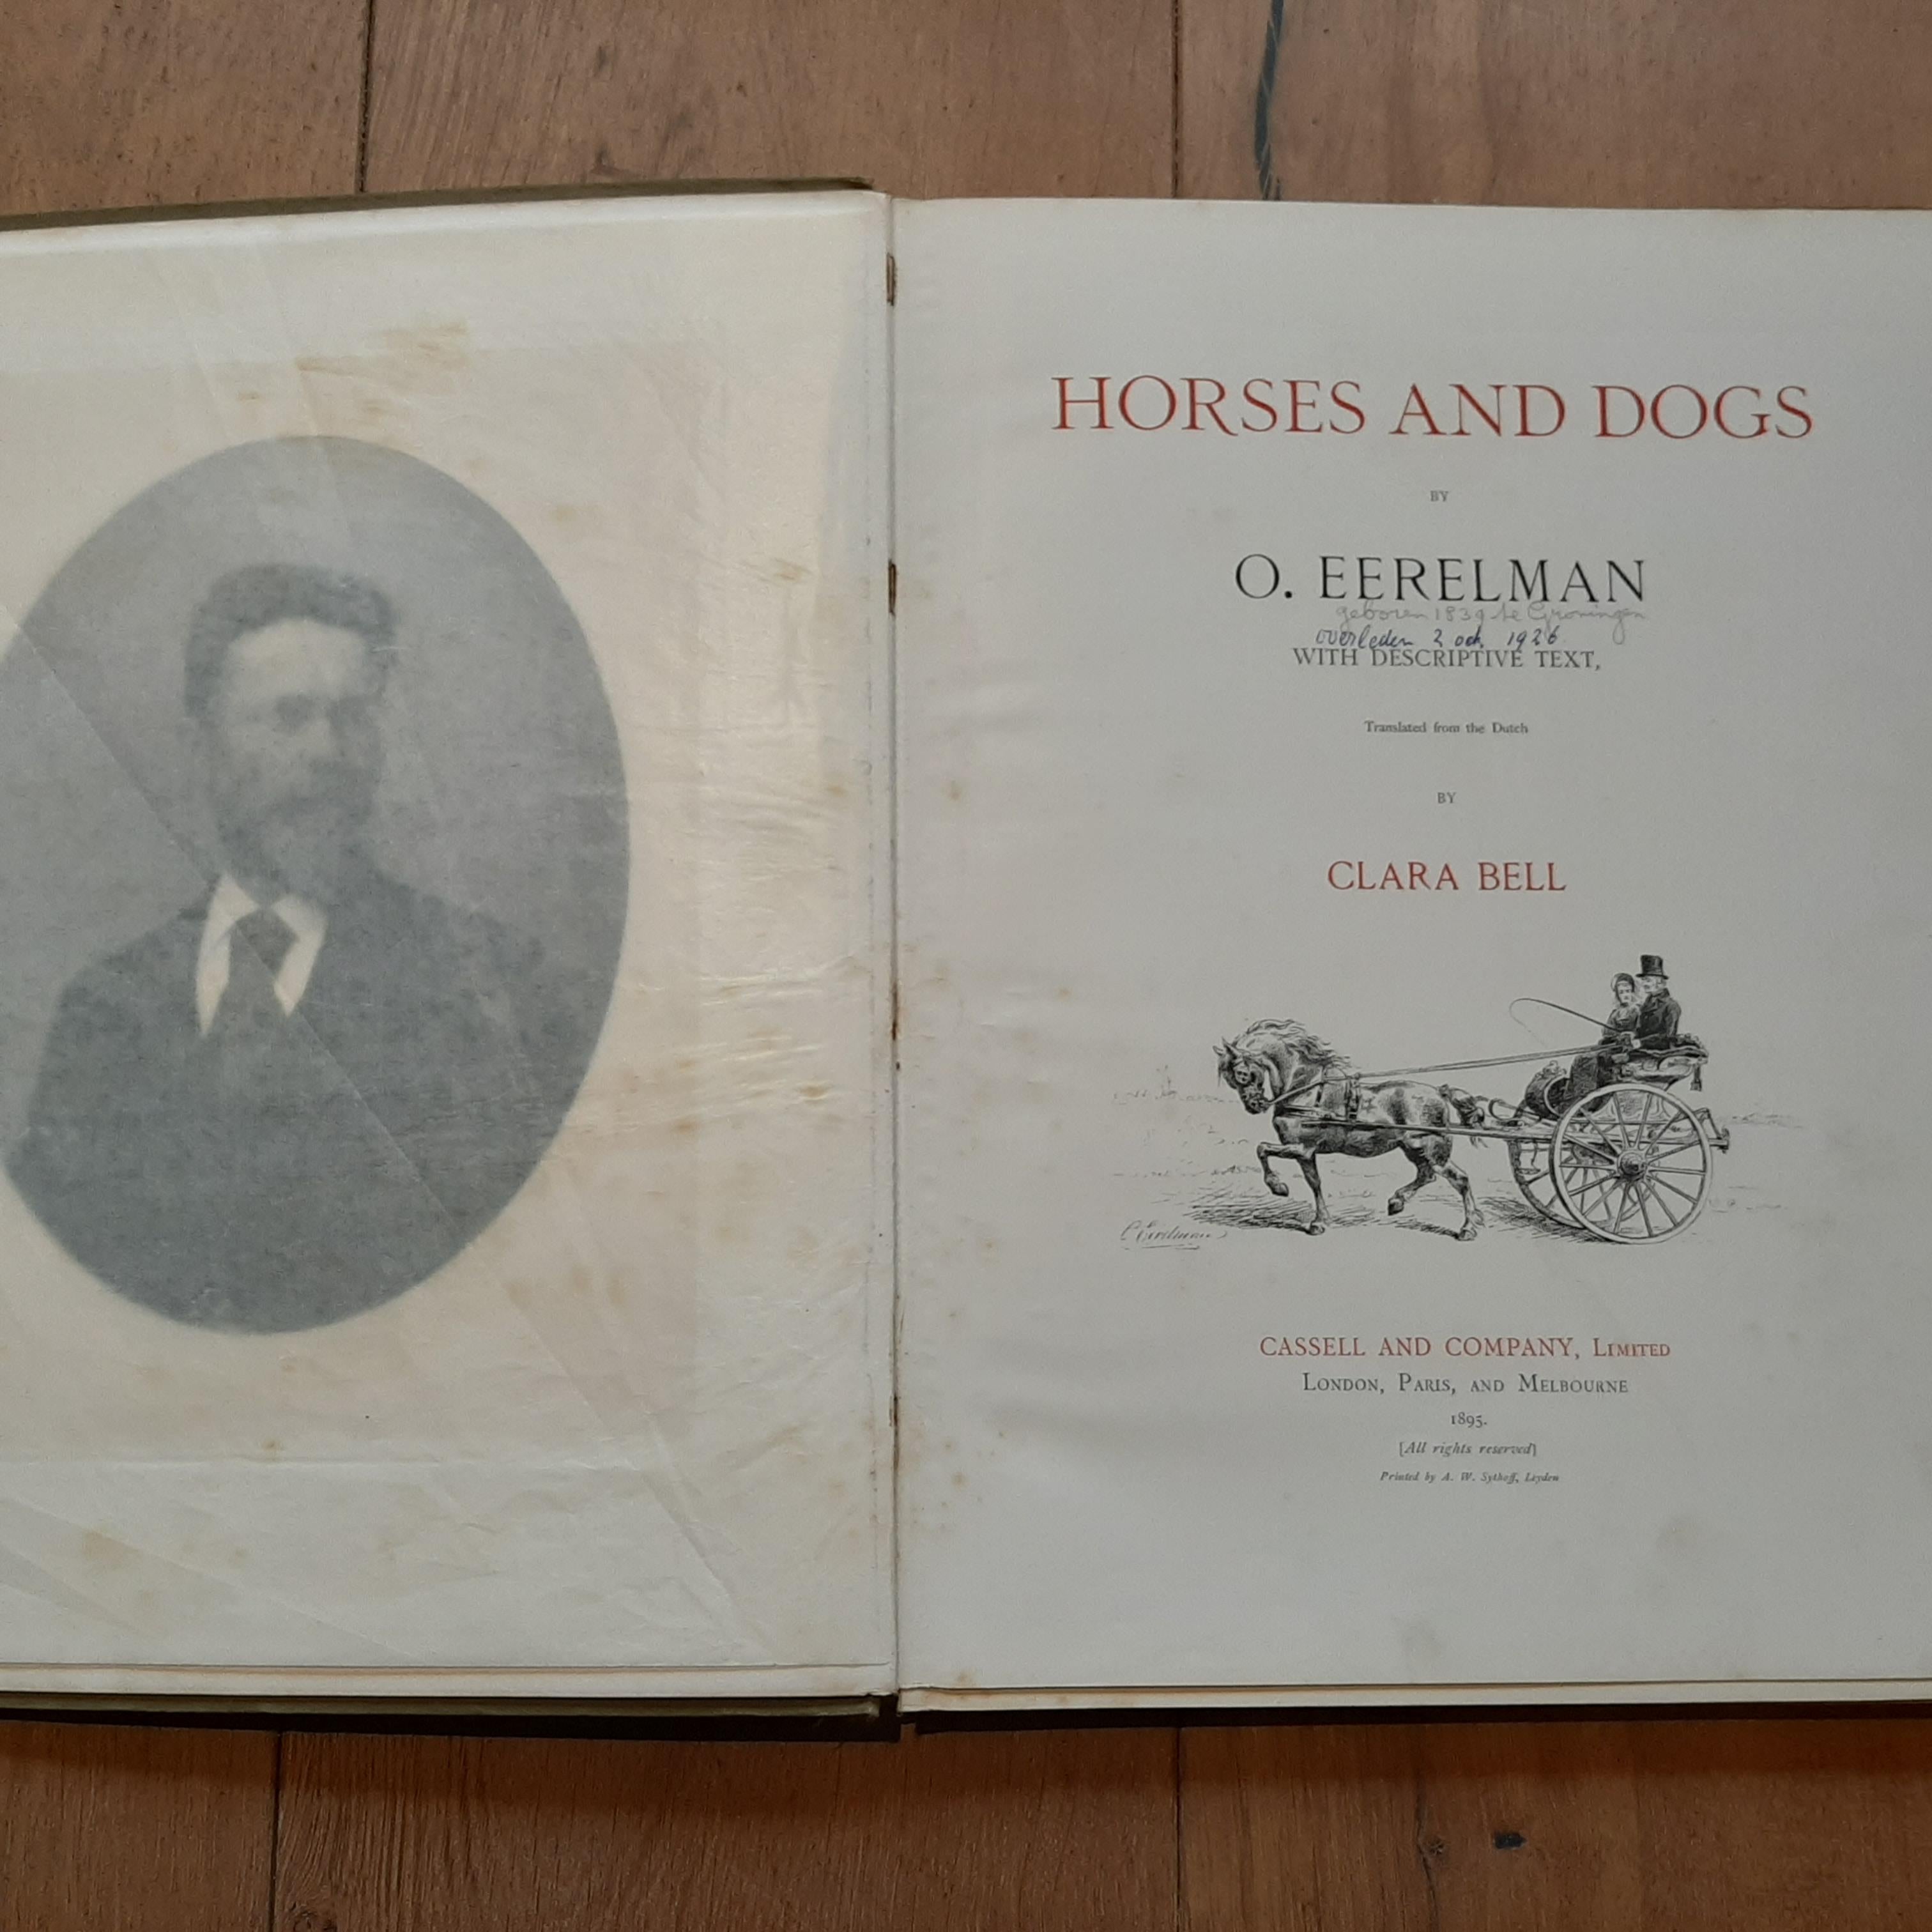 'Horses and Dogs' by O. Eerelman. With descriptive text, translated from the Dutch by Clara Bell. With 15 full page illustrations, frontispiece and numerous illustrations in the text. Published by Cassell and Company, 1895. Orig. Decorated Boards.